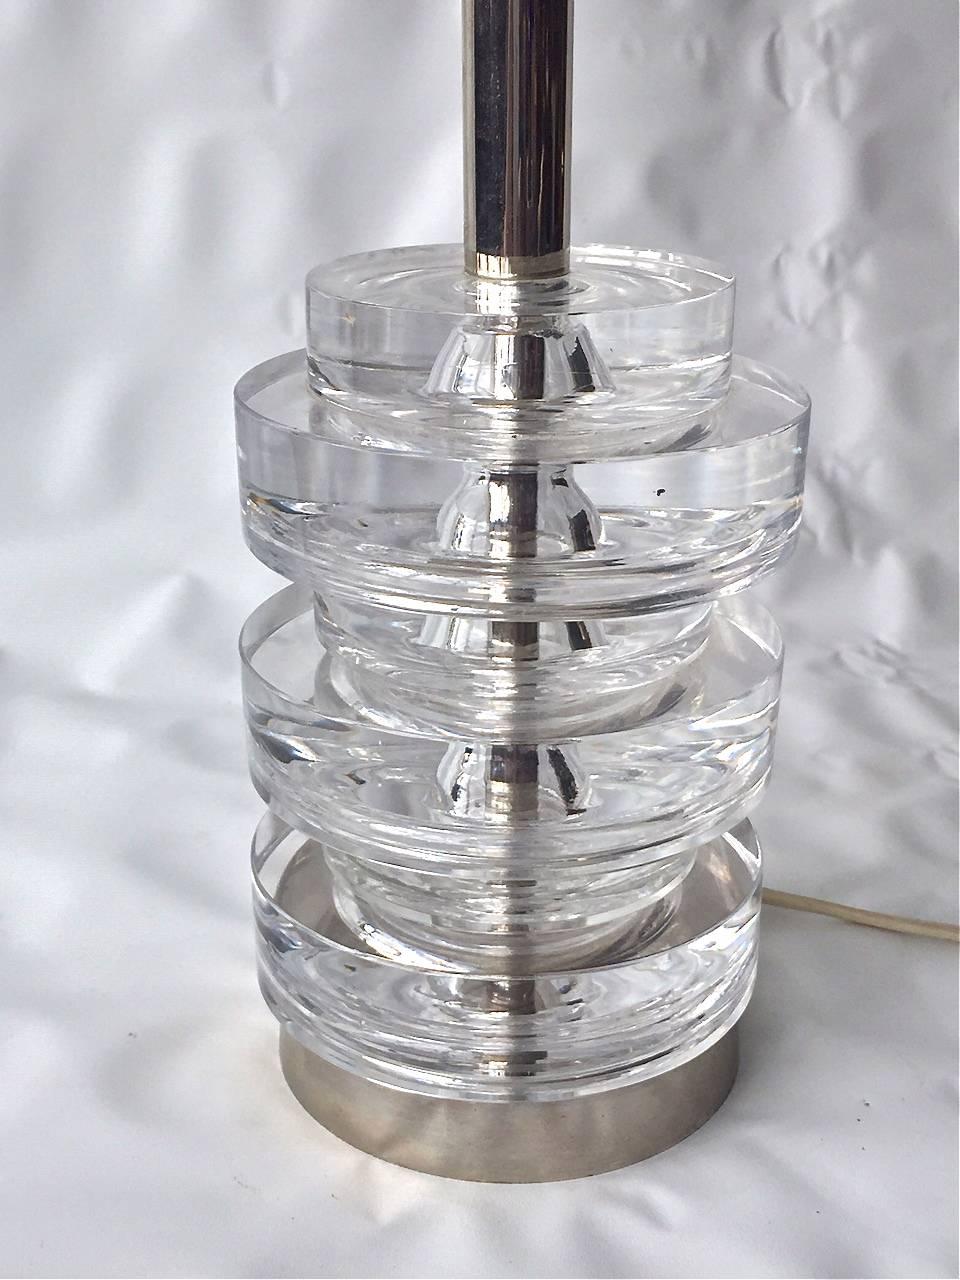 A table lamp designed by Carl Fagerlund for Orrefors, Model RD 1989, Sweden, circa 1970s. Polished chrome finish with crystal glass disks.
Measures: Diameter 4.5